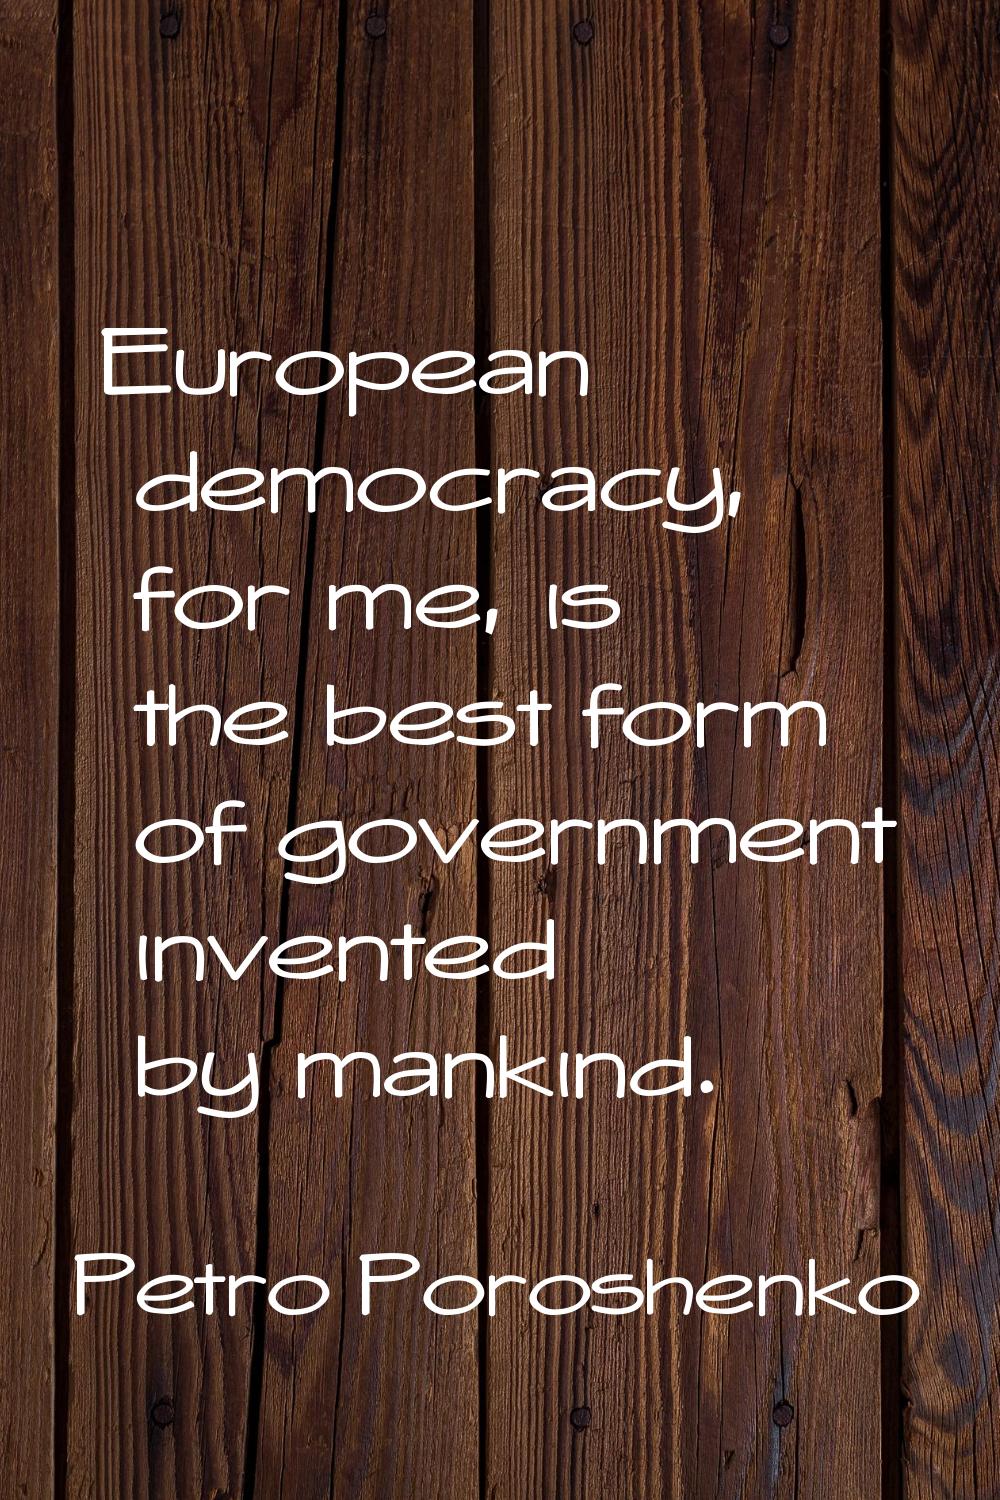 European democracy, for me, is the best form of government invented by mankind.